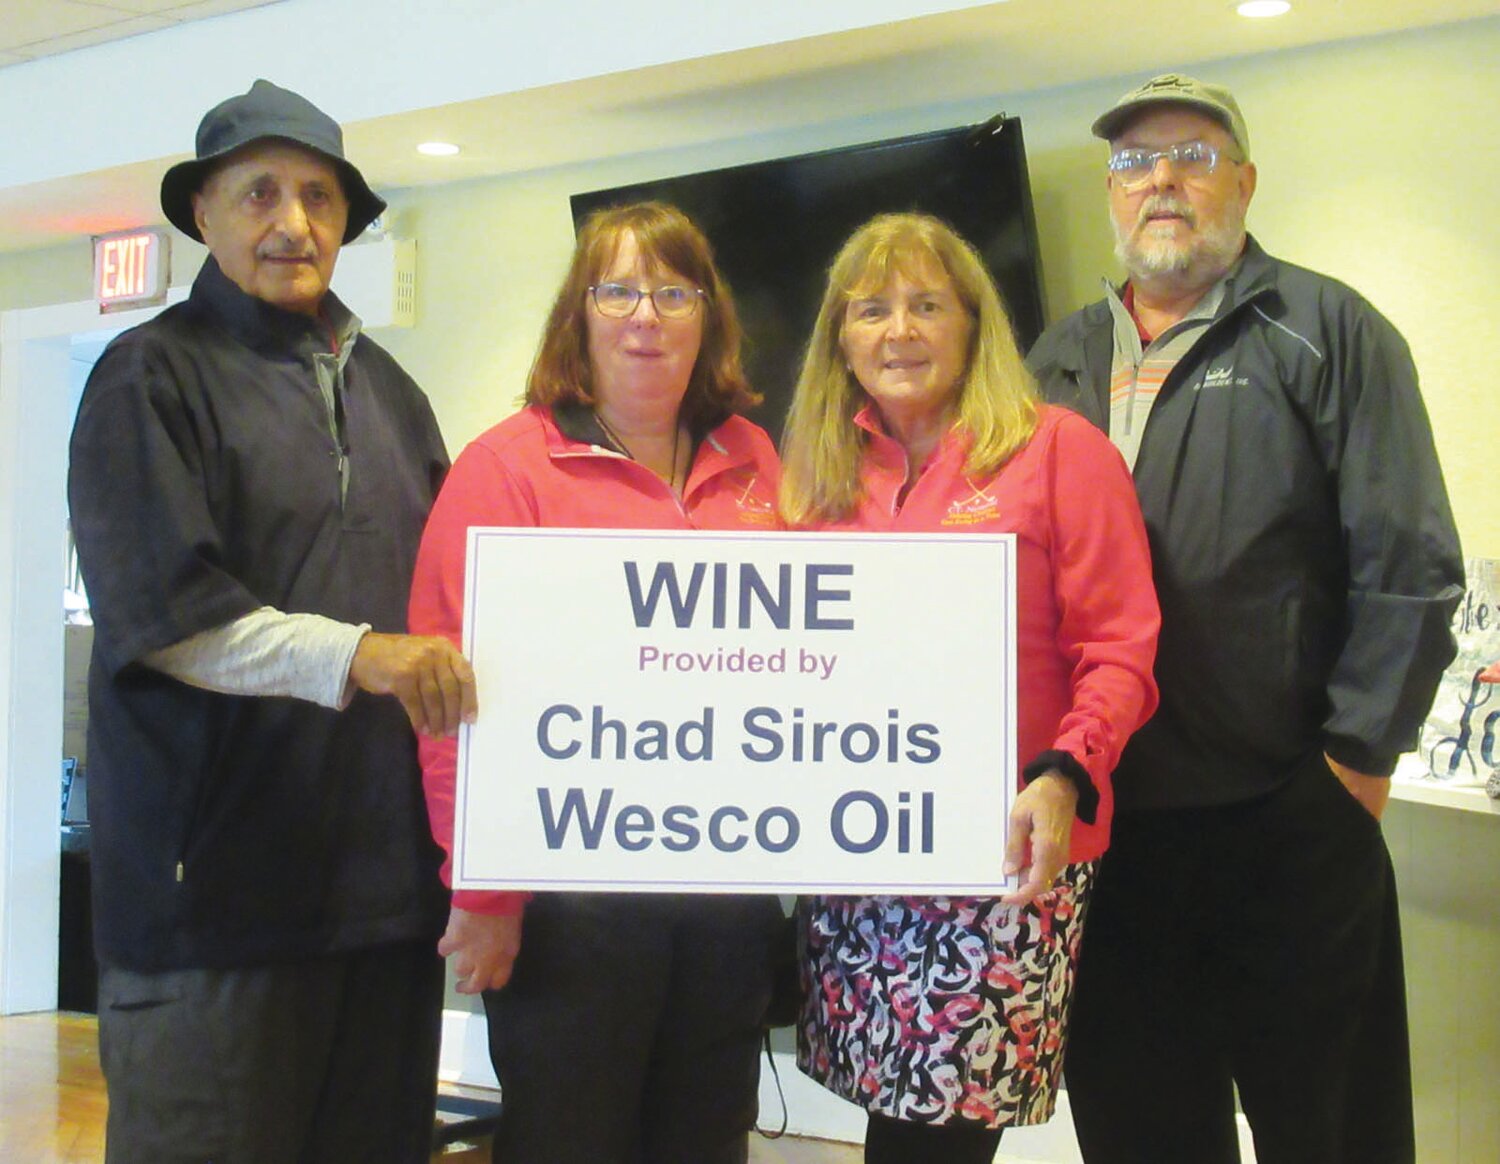 OUTSTANDING ORGANIZERS: The LaFazias – Vin and Linda – and the Graham’s – Judy and David – are holding a sign for the Chad Sirois Wesco Oil wine sponsors. (Sun Rise photo by Pete Fontaine)